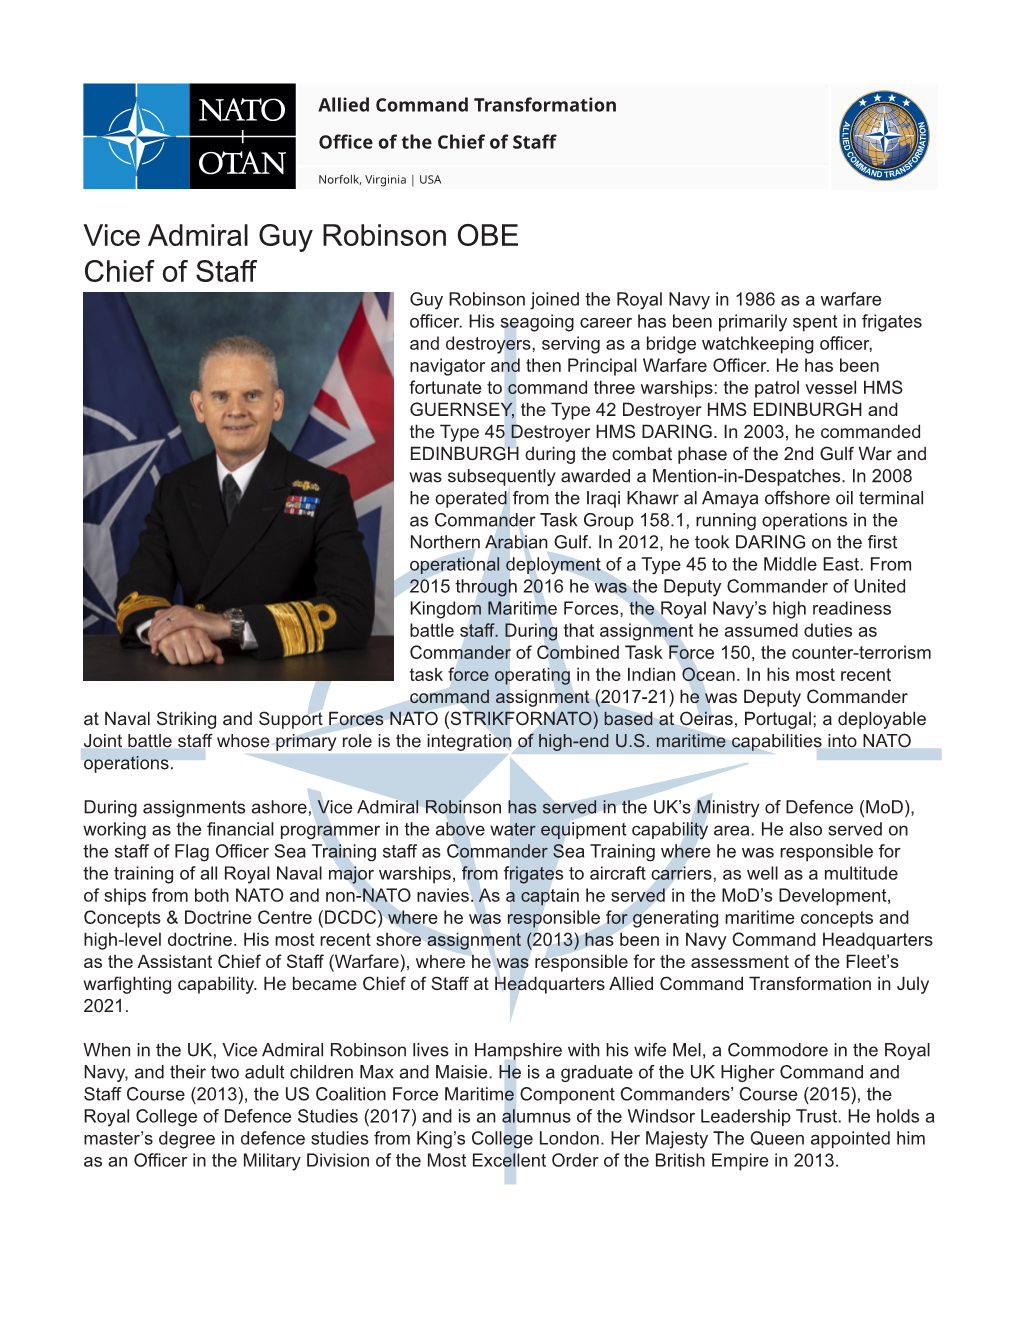 Vice Admiral Guy Robinson OBE Chief of Staff Guy Robinson Joined the Royal Navy in 1986 As a Warfare Officer